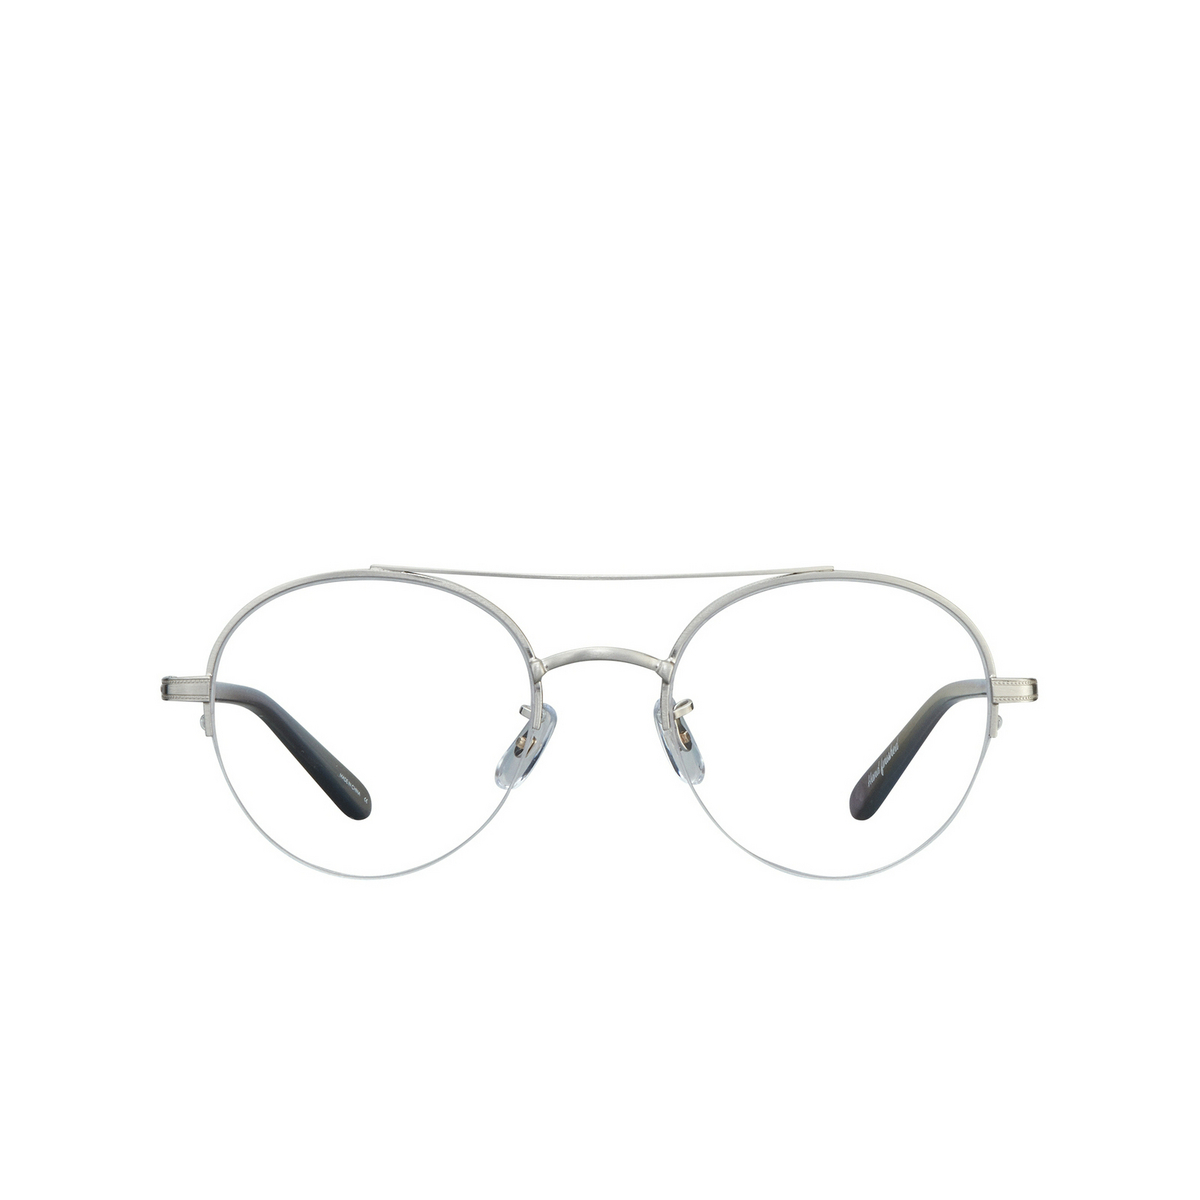 Garrett Leight MANCHESTER Eyeglasses BS-GCR Brushed Silver-Grey Crystal - front view